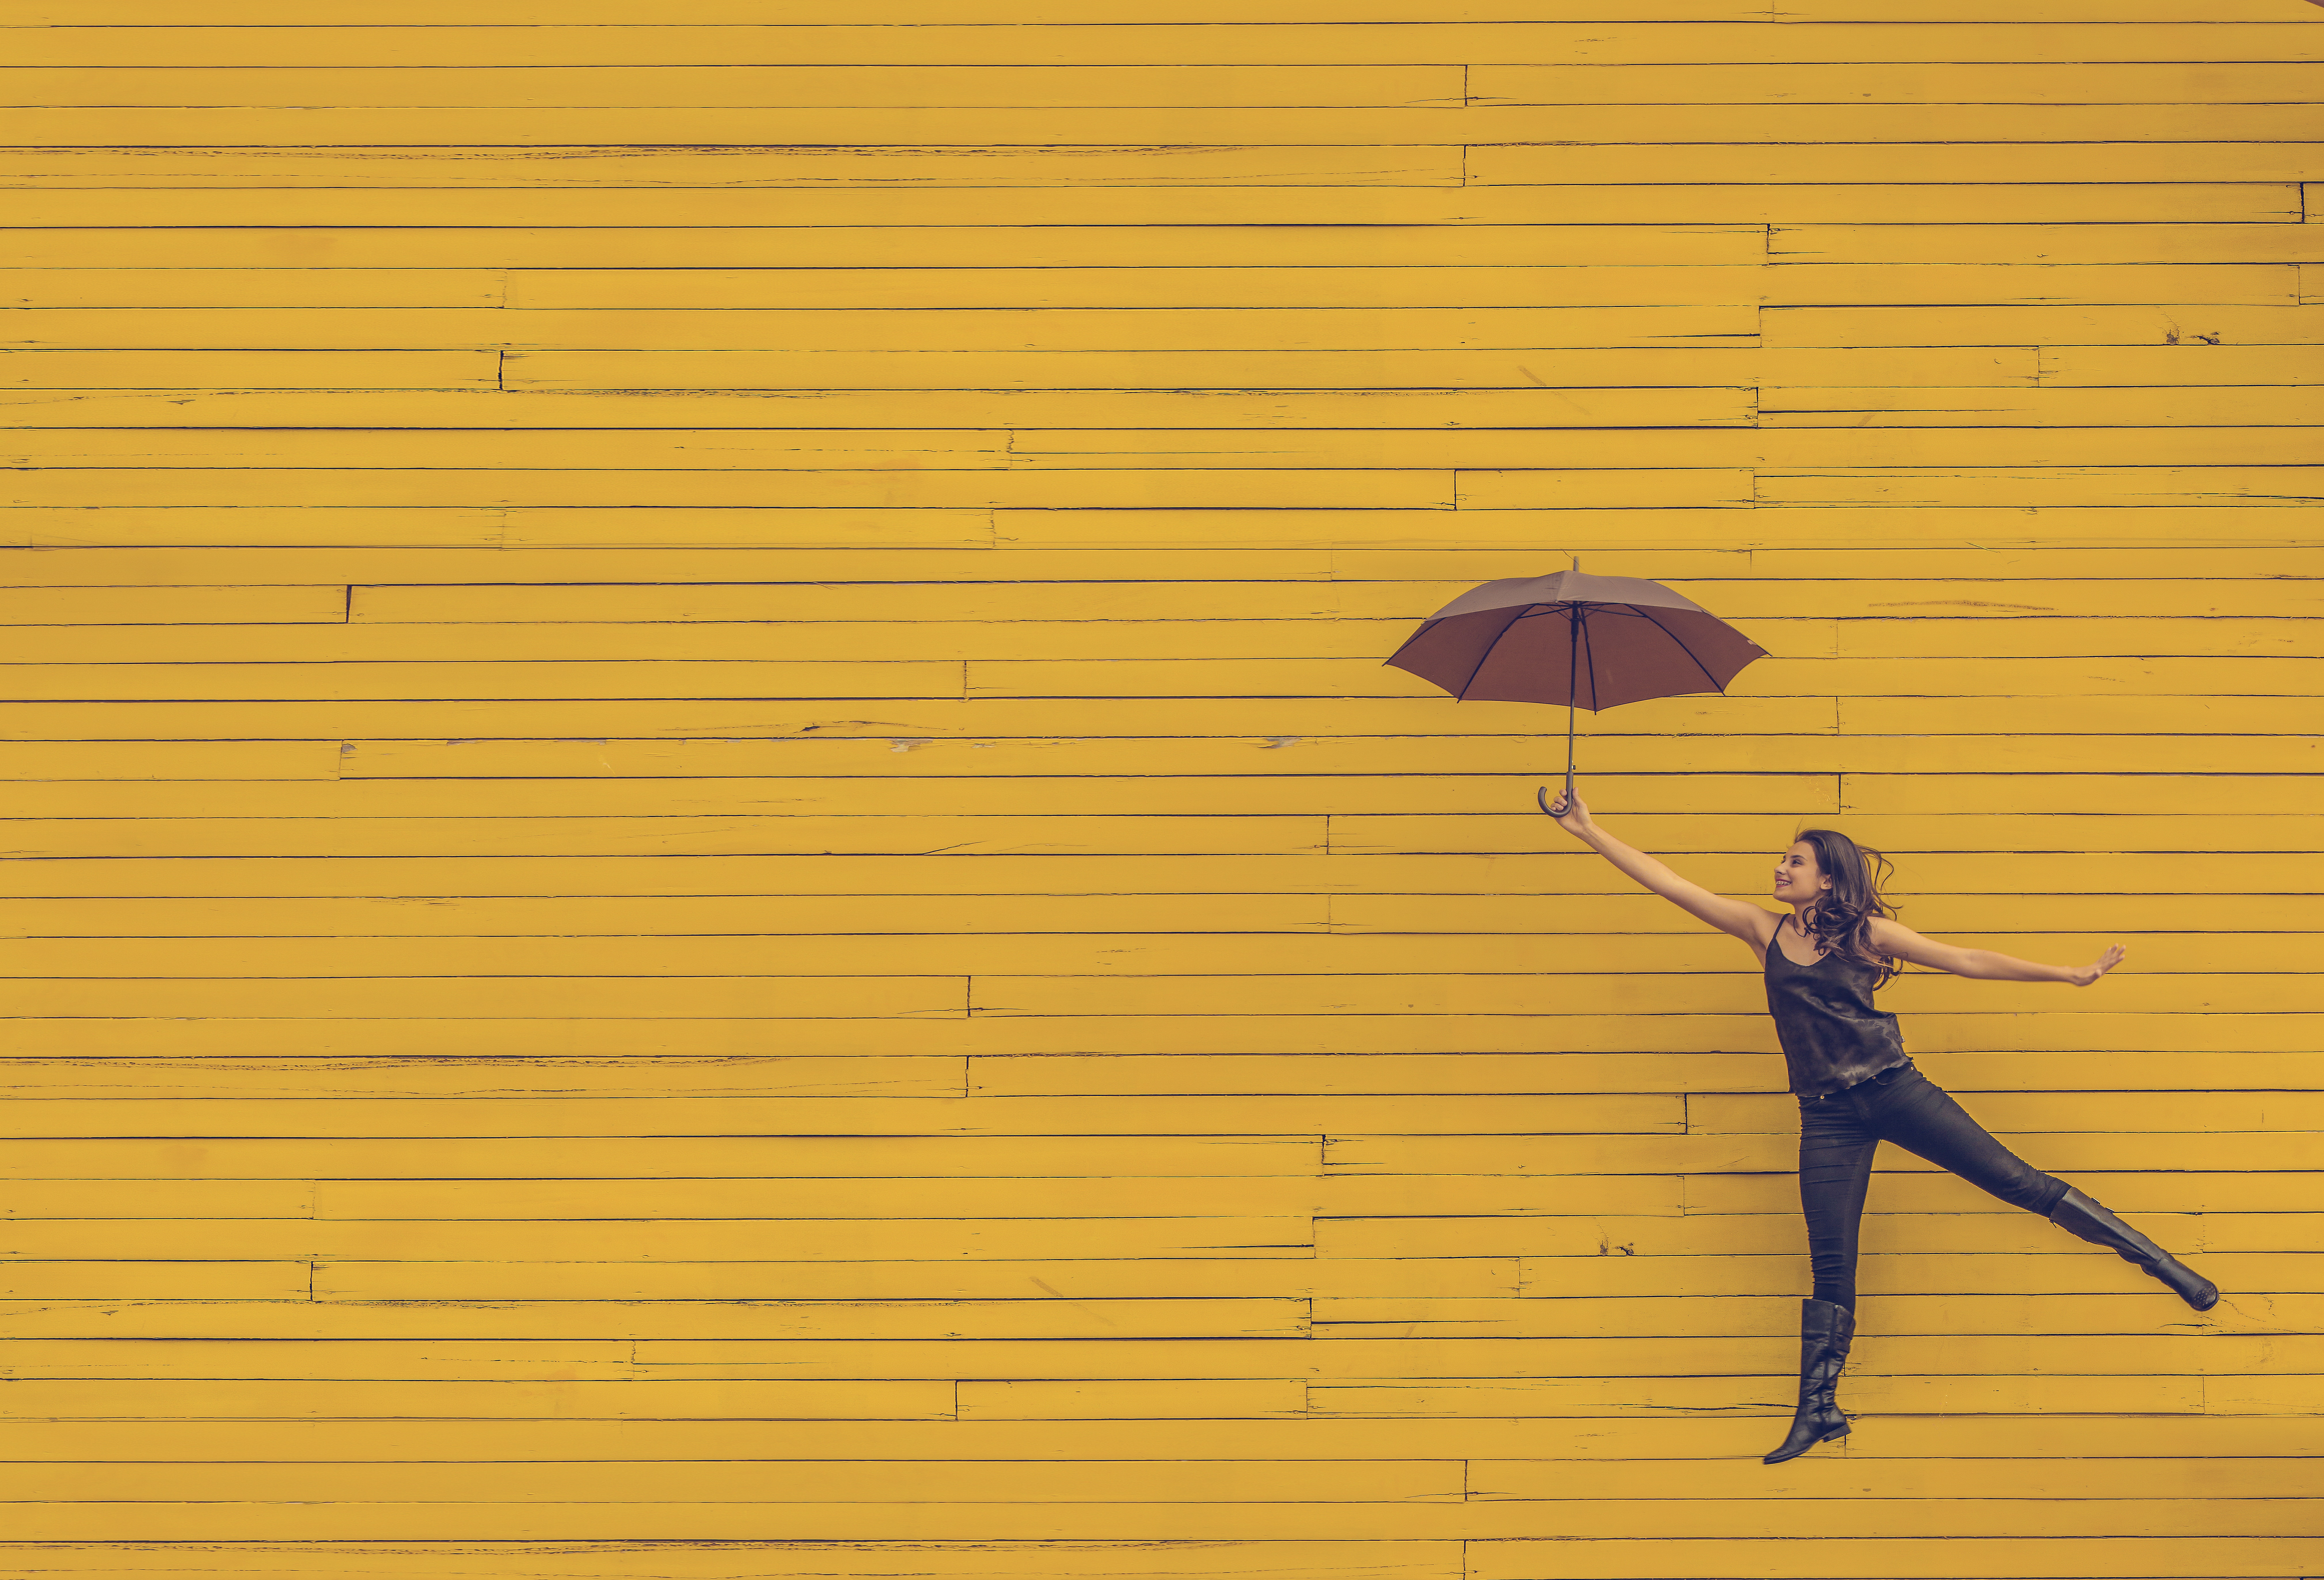 Women-learning-to-fly-with-umbrella-yellow-background